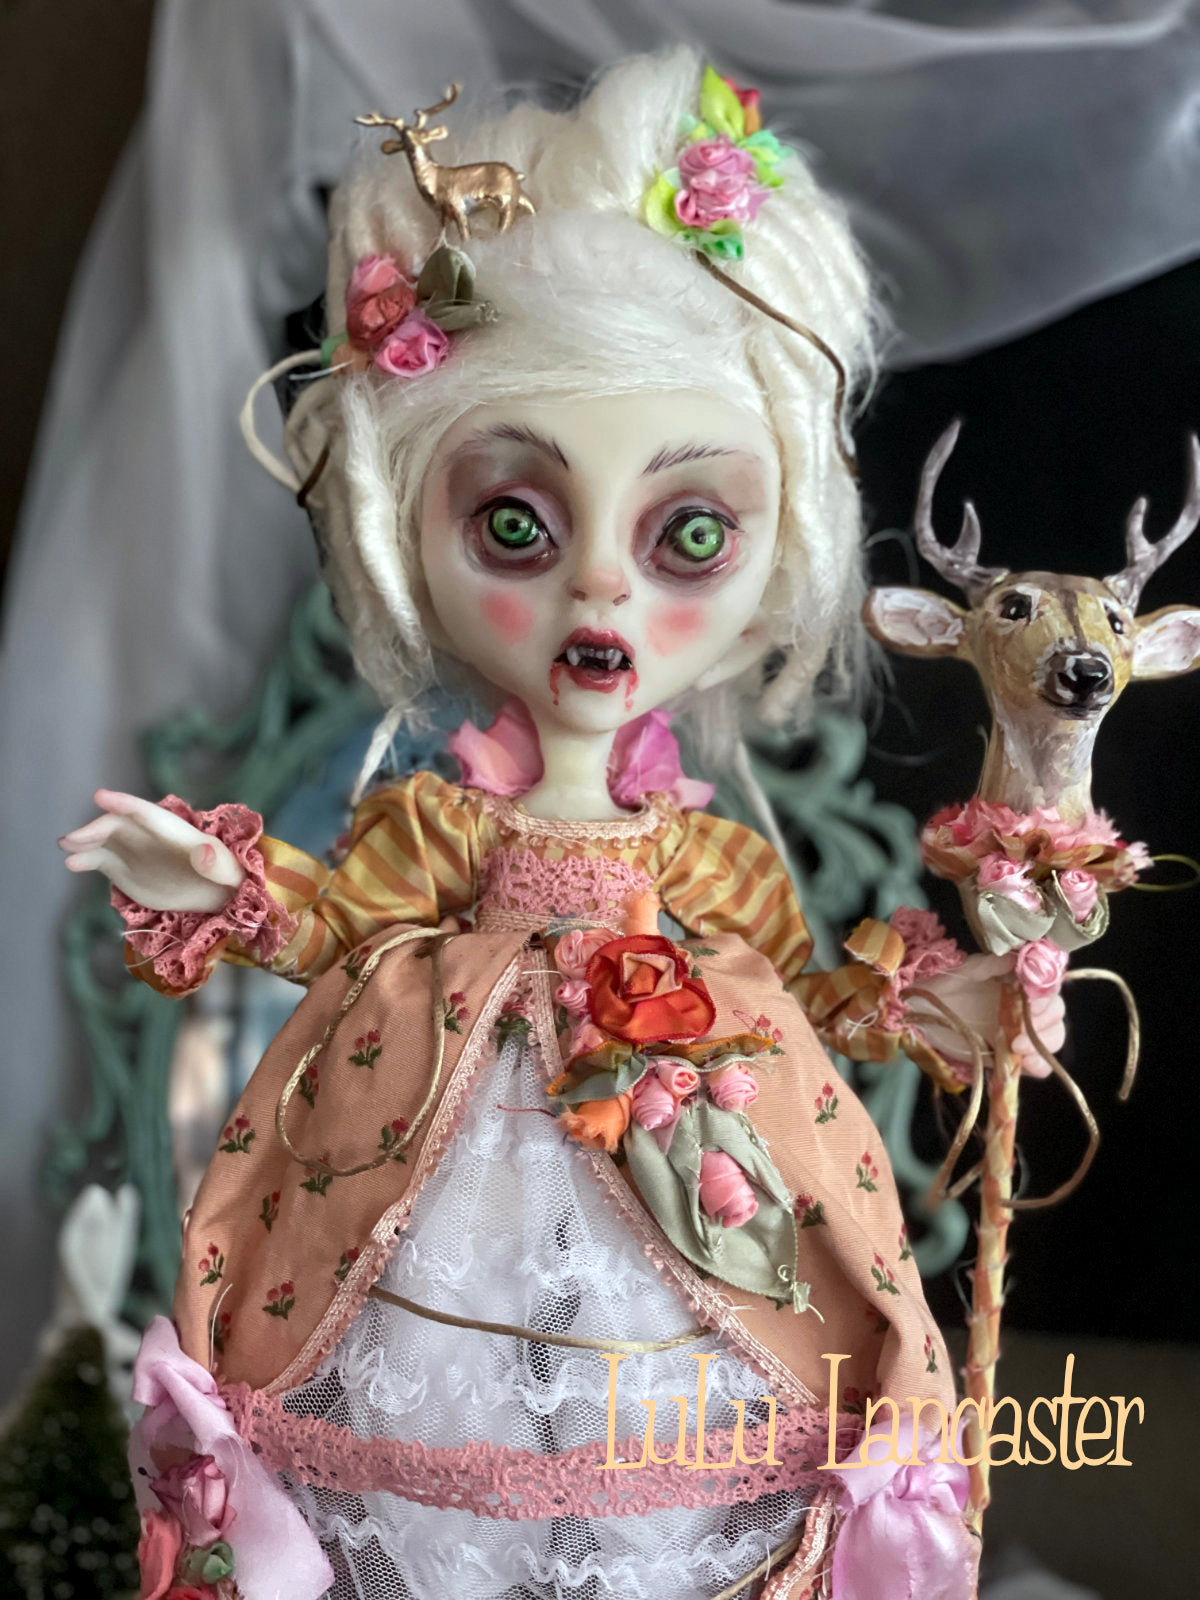 Aphra the rococo Vampire Art Doll LuLu Lancaster ~Ominous III, Hinge Artist Collective Group show